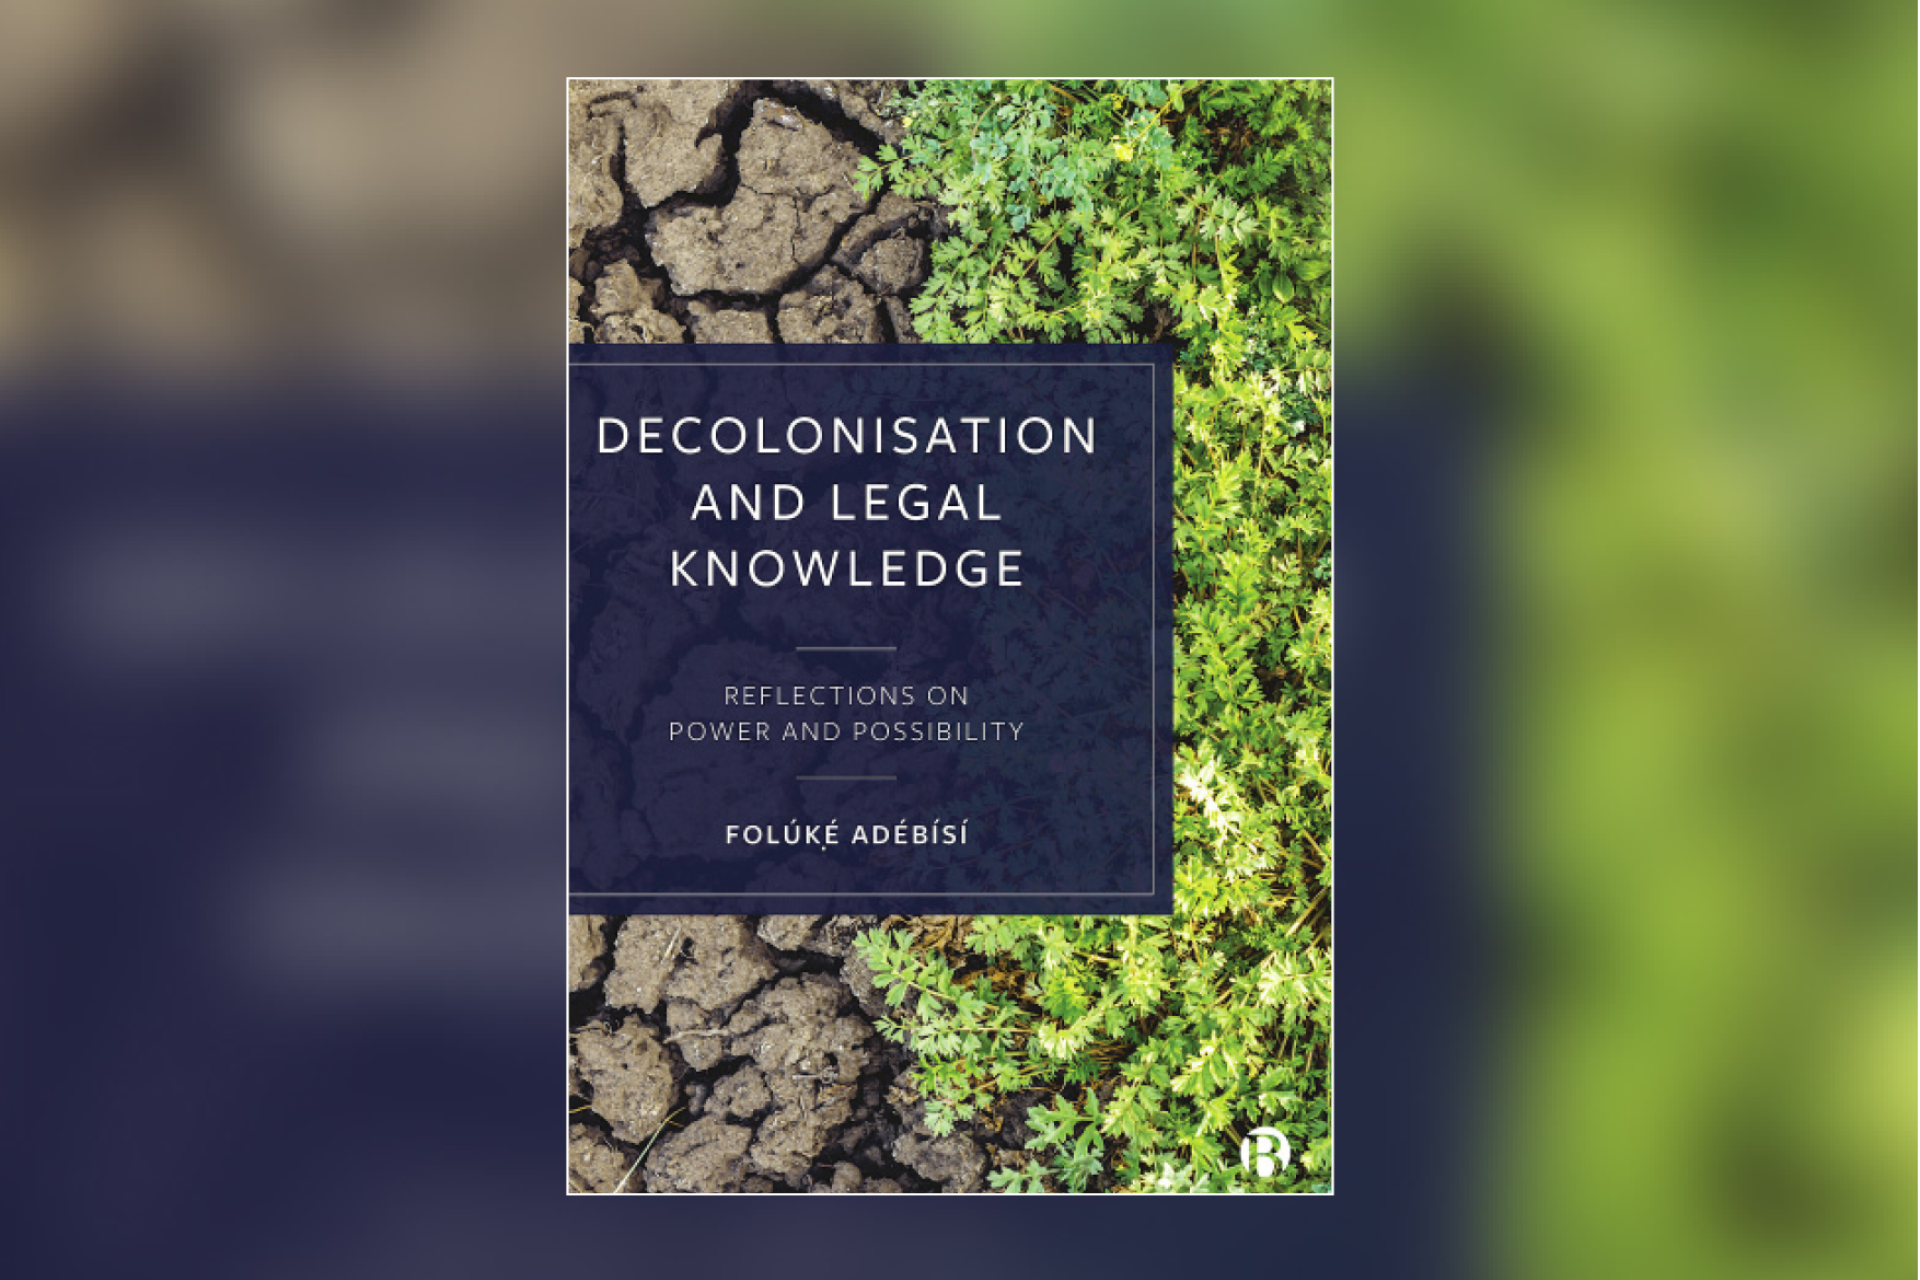 Cover image of the book Decolonisation and Legal Knowledge. The book title and author information is located in a blue box on the centre-left of the cover. Behind is an image of cracked earth meeting green branches and foliage which are growing from the right edge of the cover. 